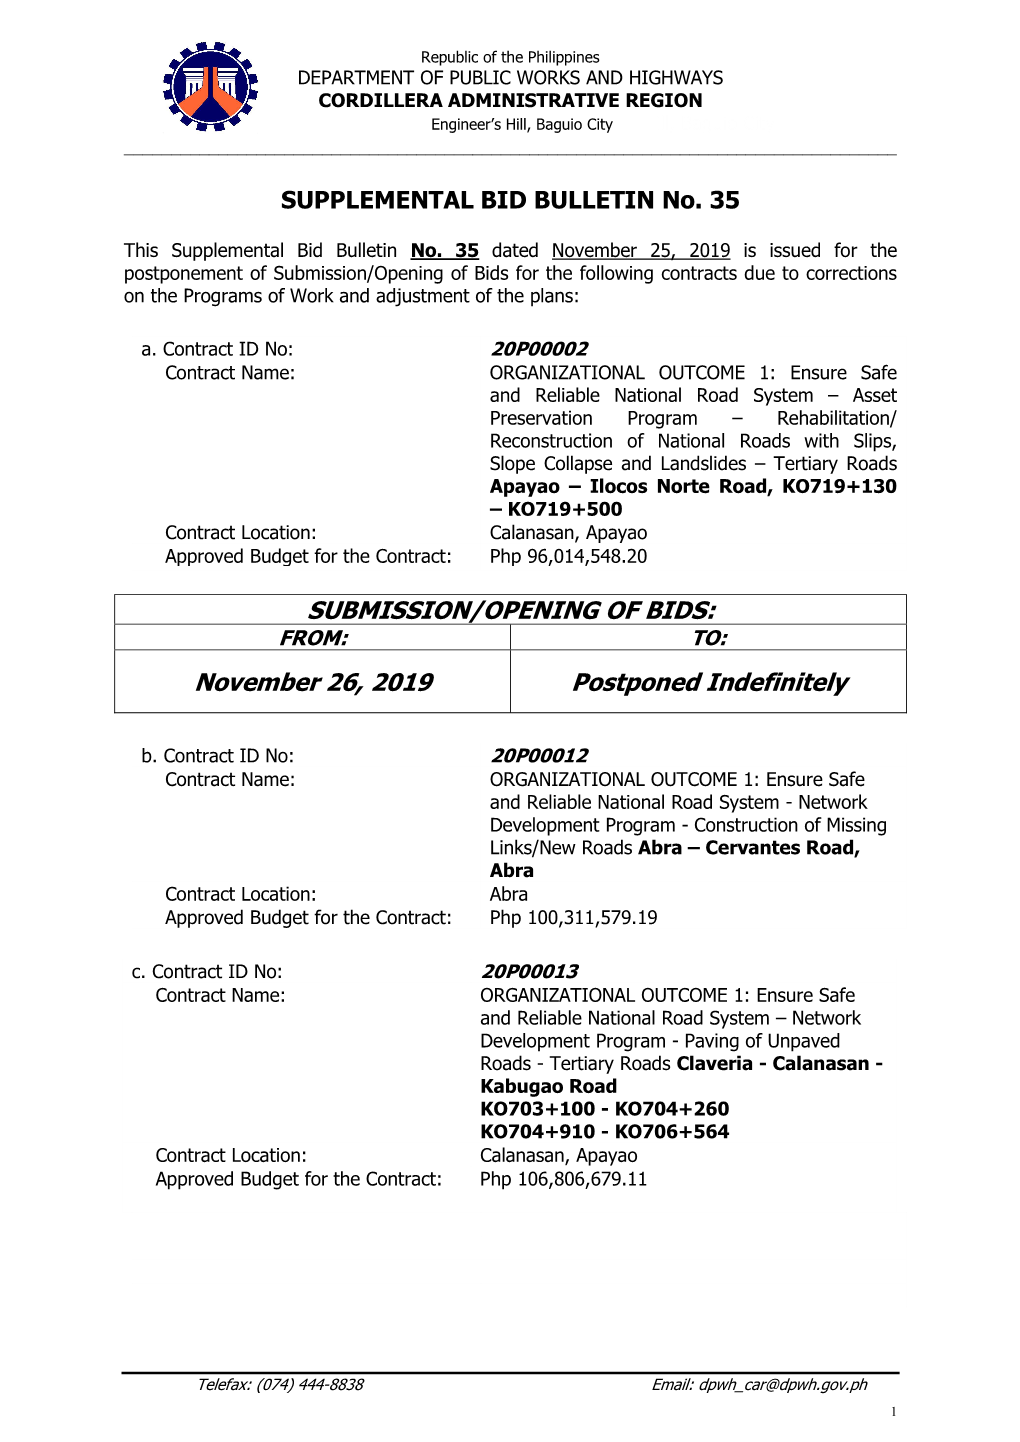 SUBMISSION/OPENING of BIDS: November 26, 2019 Postponed